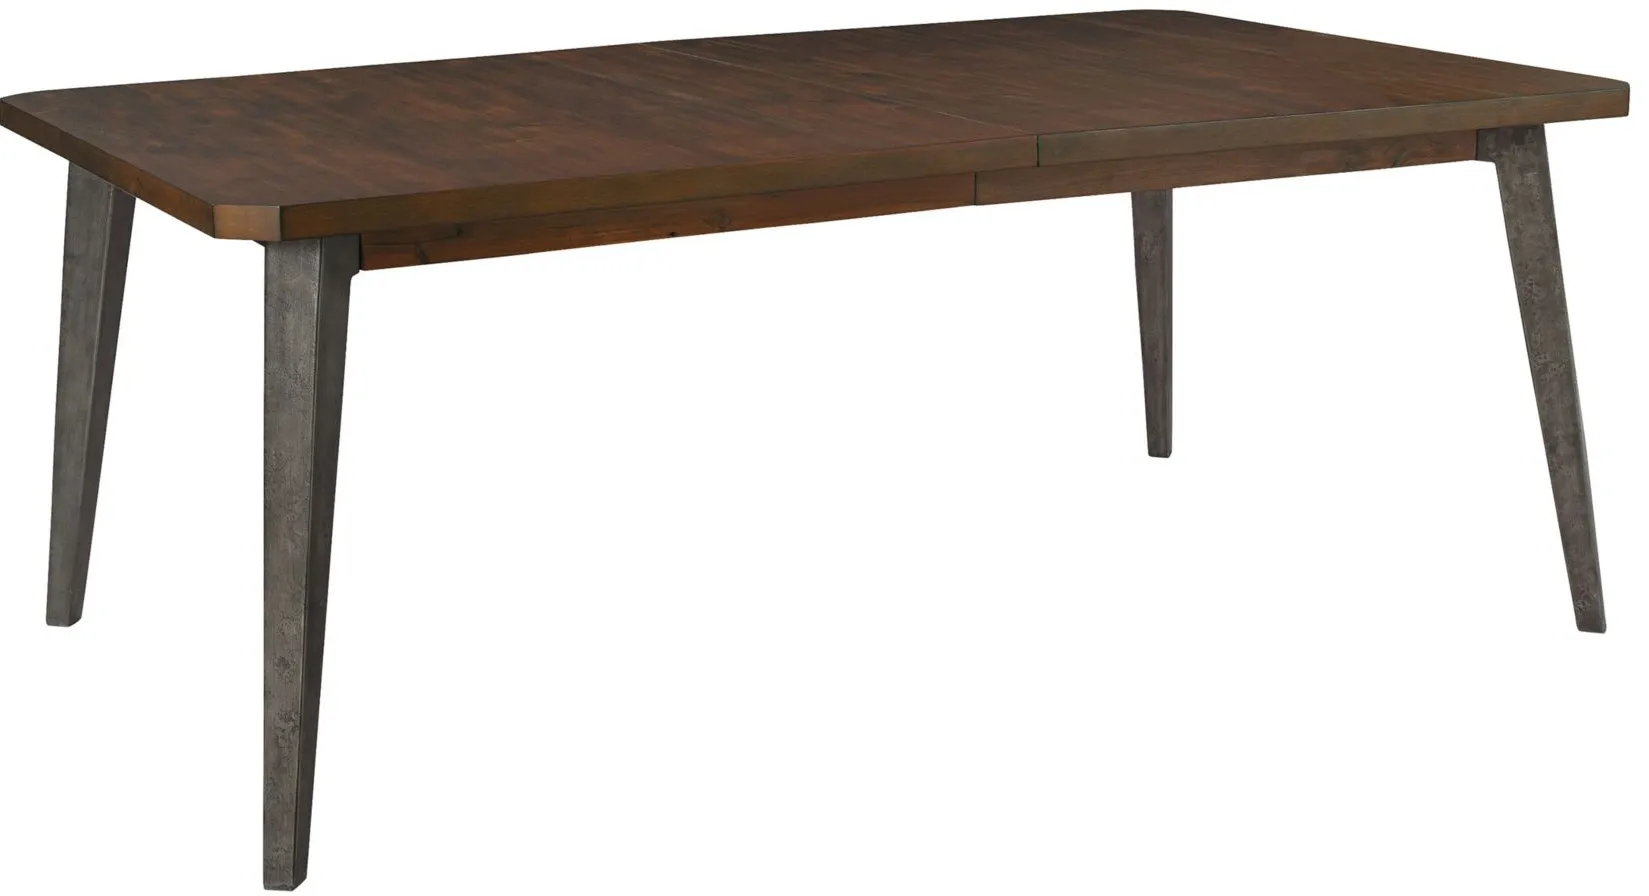 Monterey Point Rectangular Dining Table in MONTEREY POINT by Hekman Furniture Company